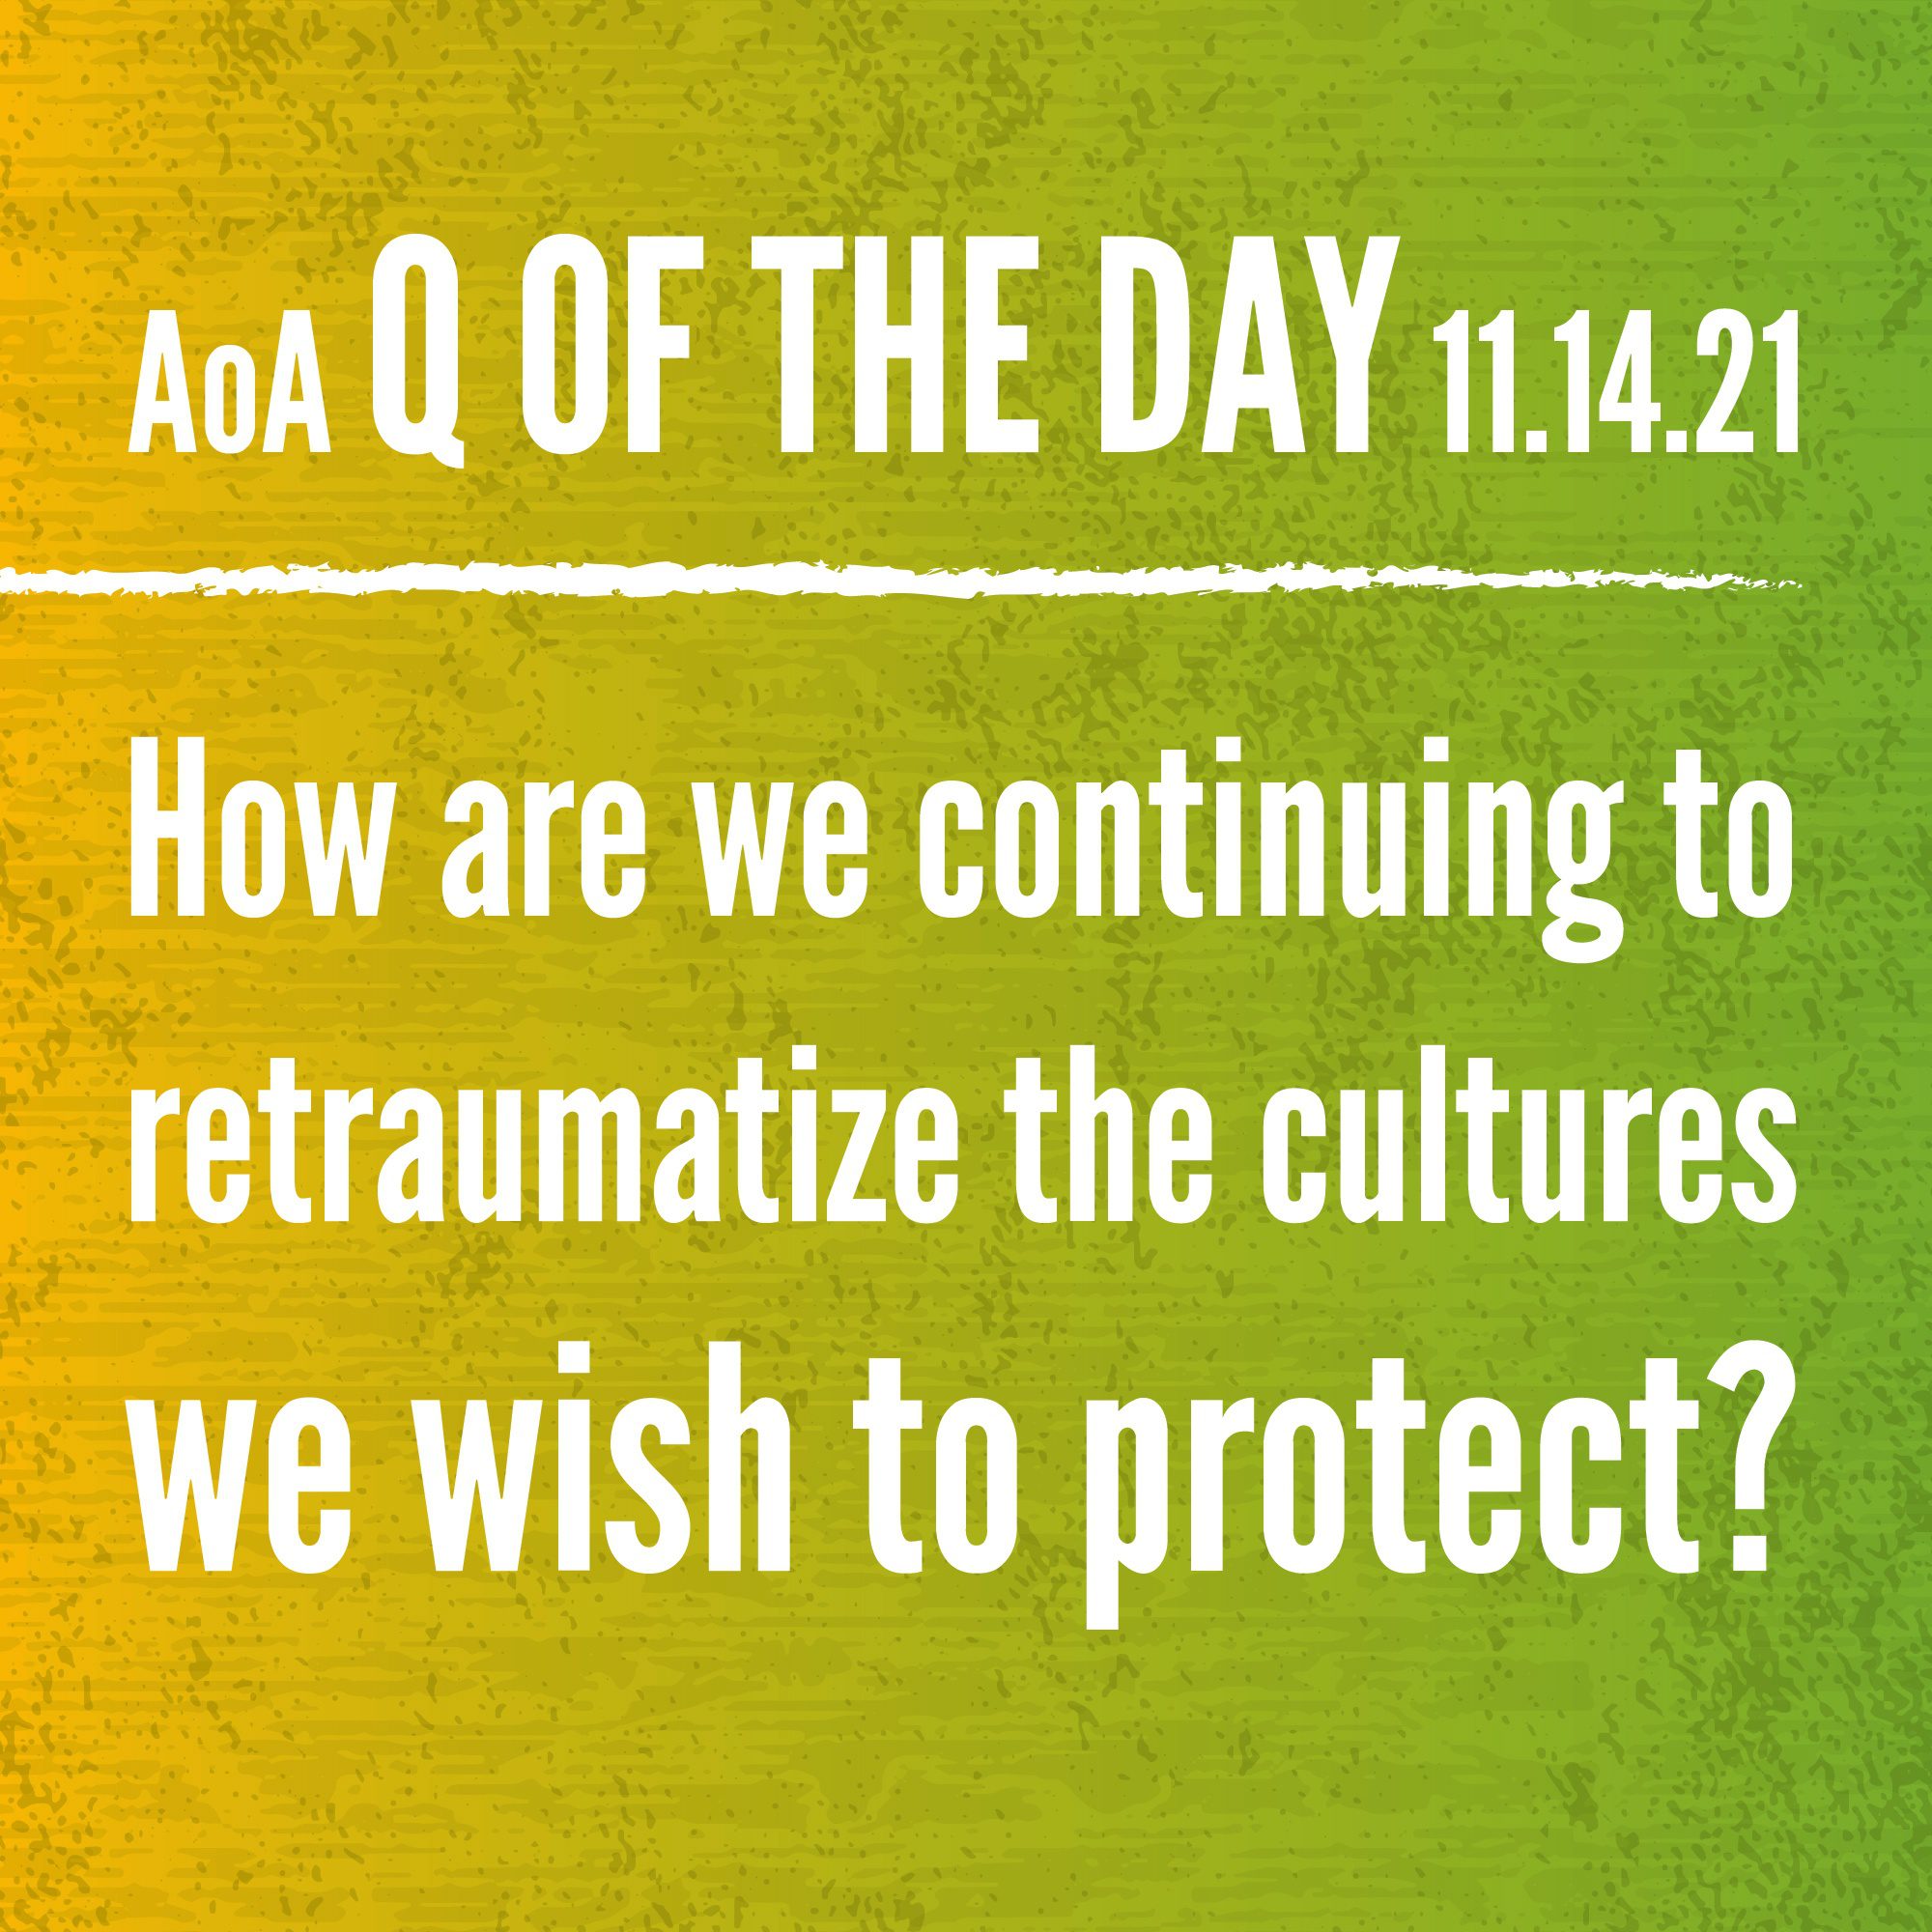 AoA Q of the Day Nov 14, 2021: How are we continuing to retraumatize the cultures we wish to protect?